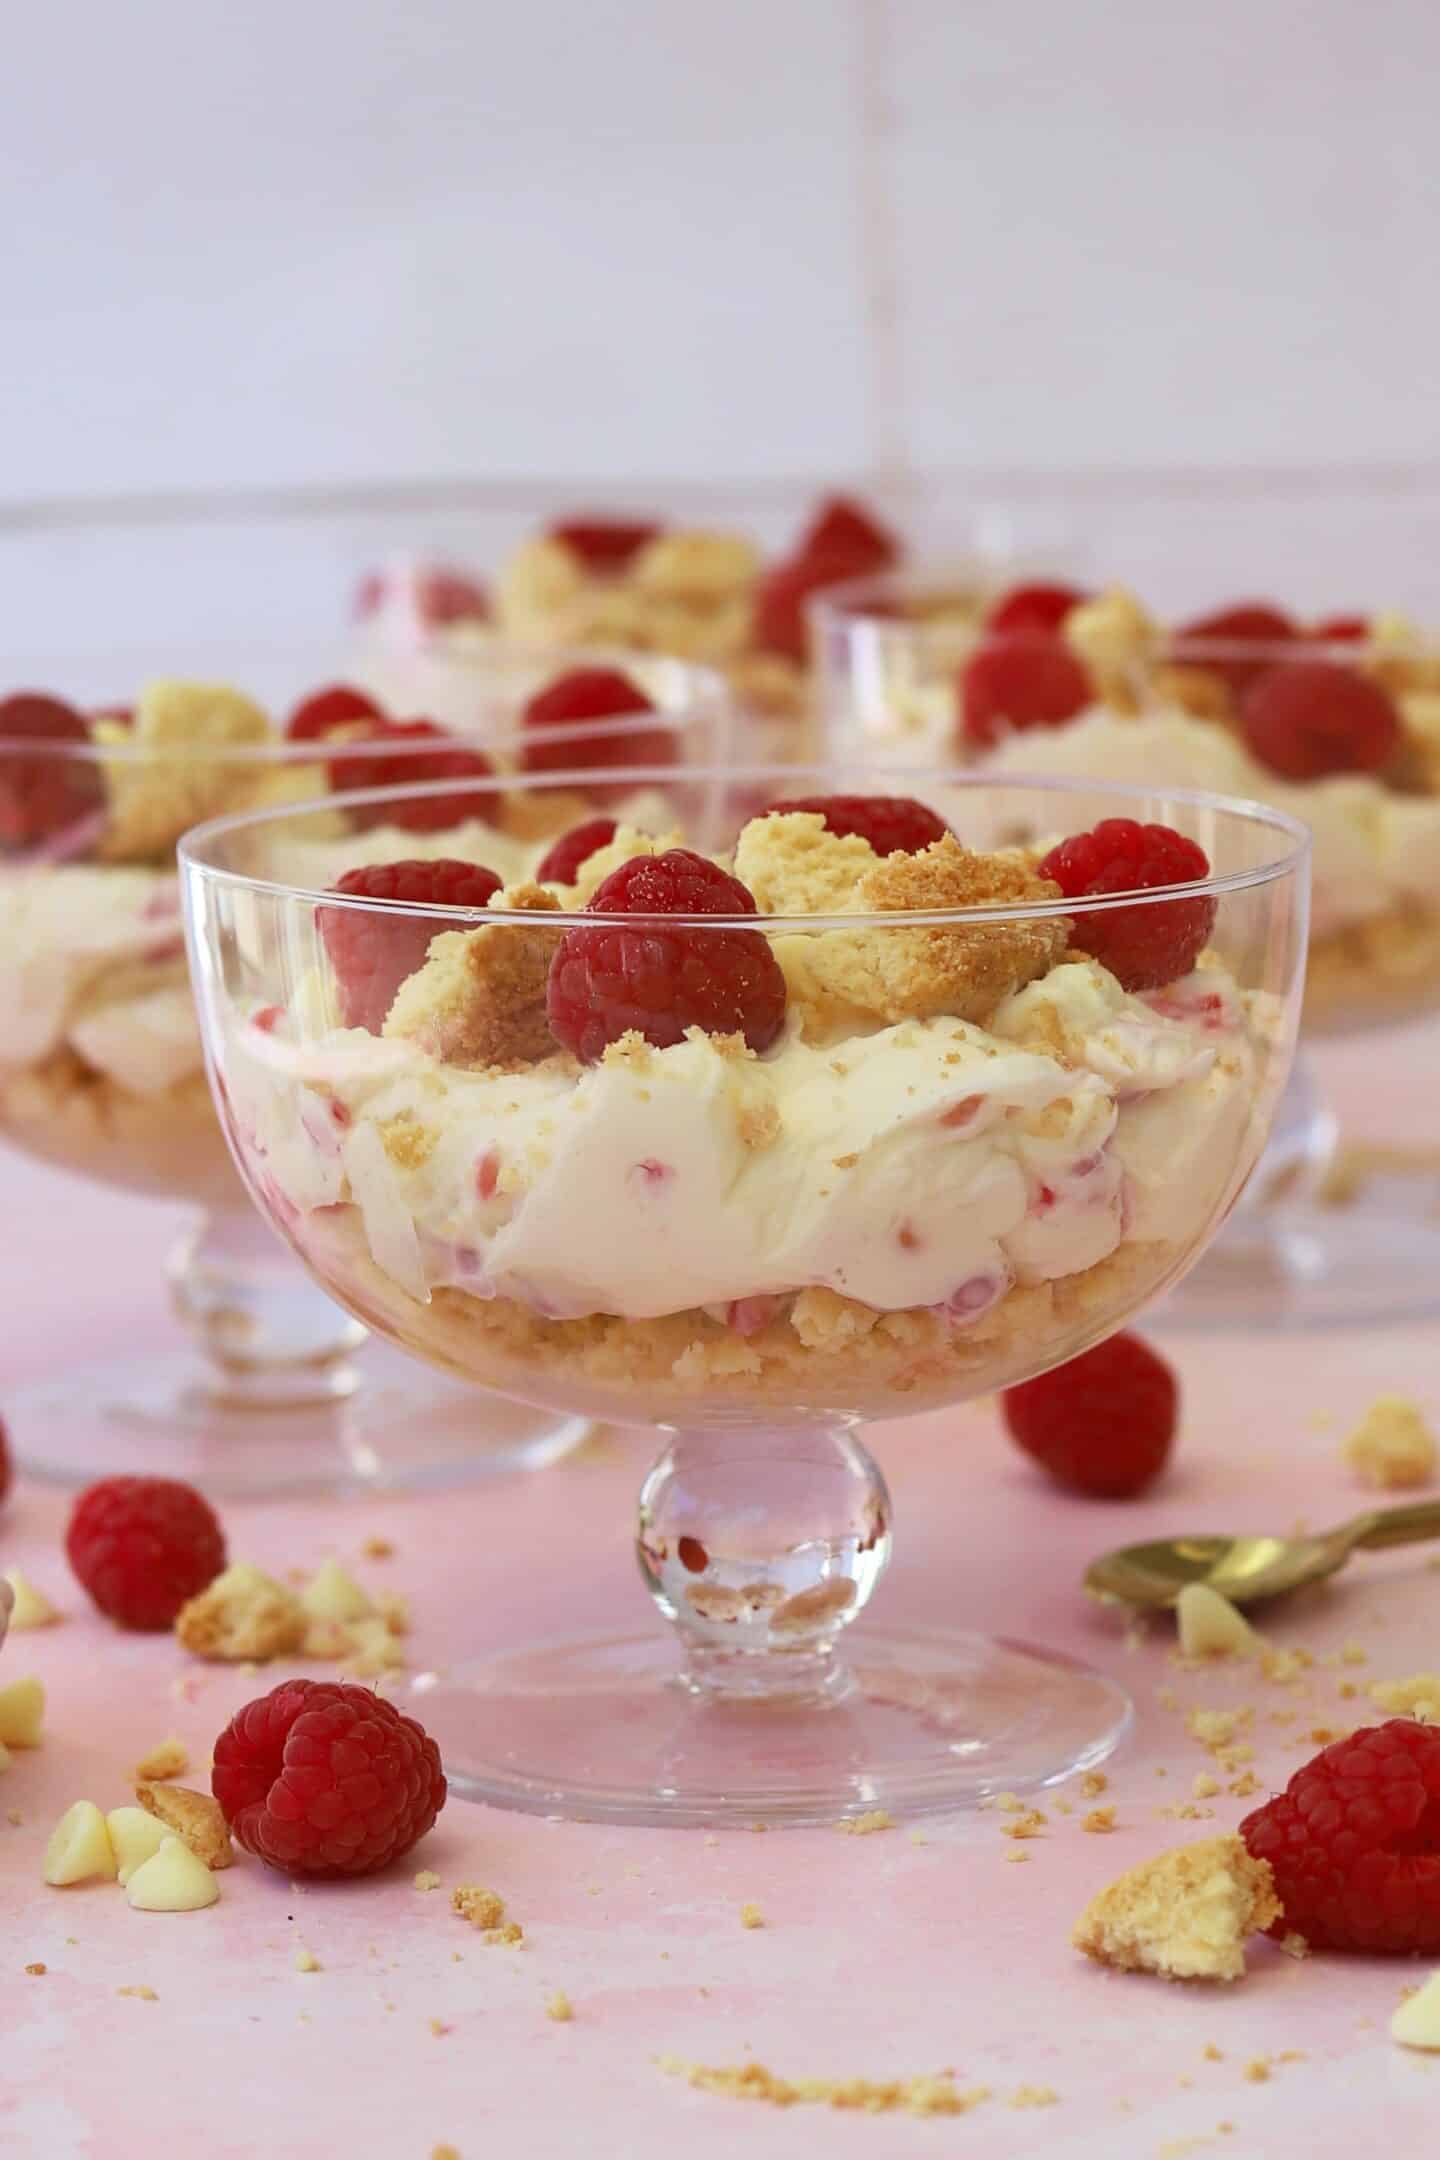 Raspberry and white chocolate cheesecakes in individual glass dishes.